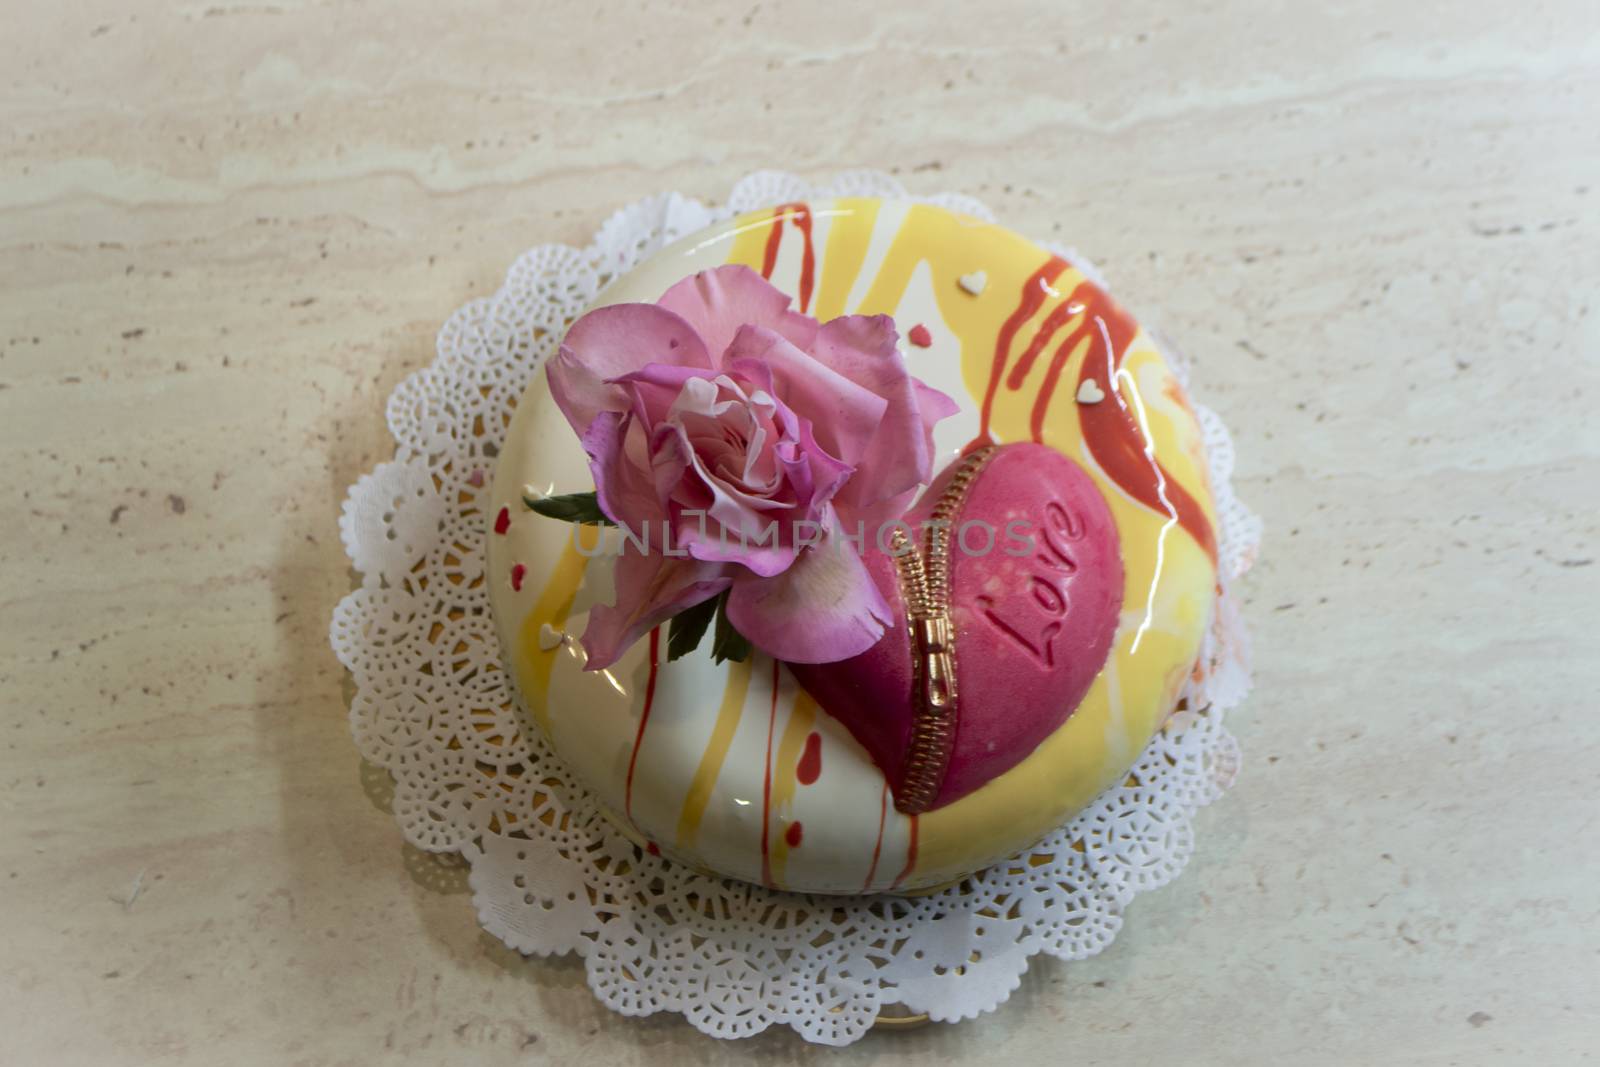 mousse cake with heart of chocolate decorated with edible rose. Fondant flower by annaolgabymonaco